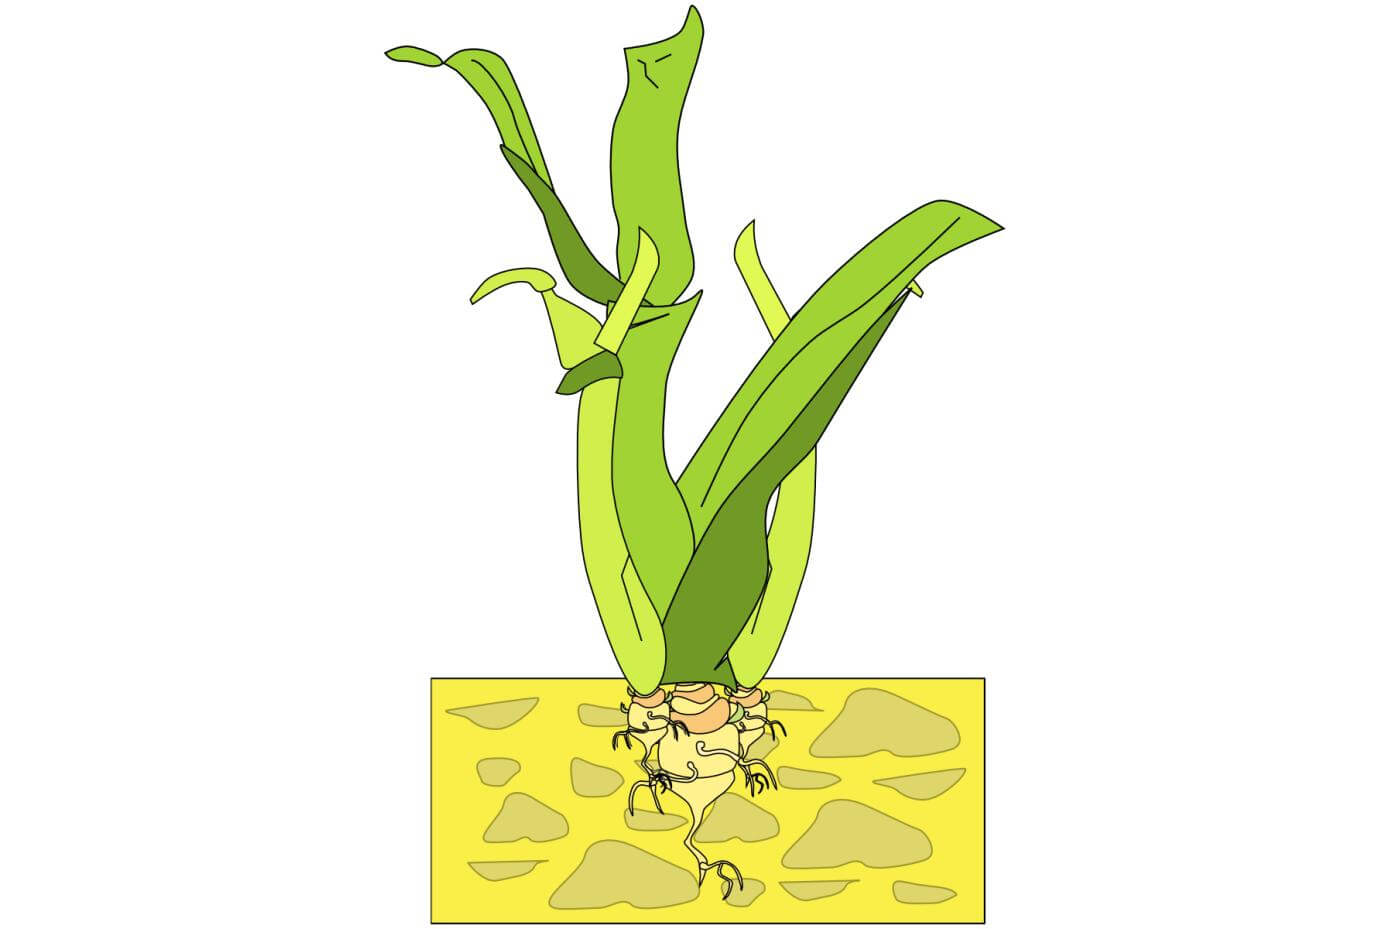 Illustration showing an axillary bud emerge from grass plant.